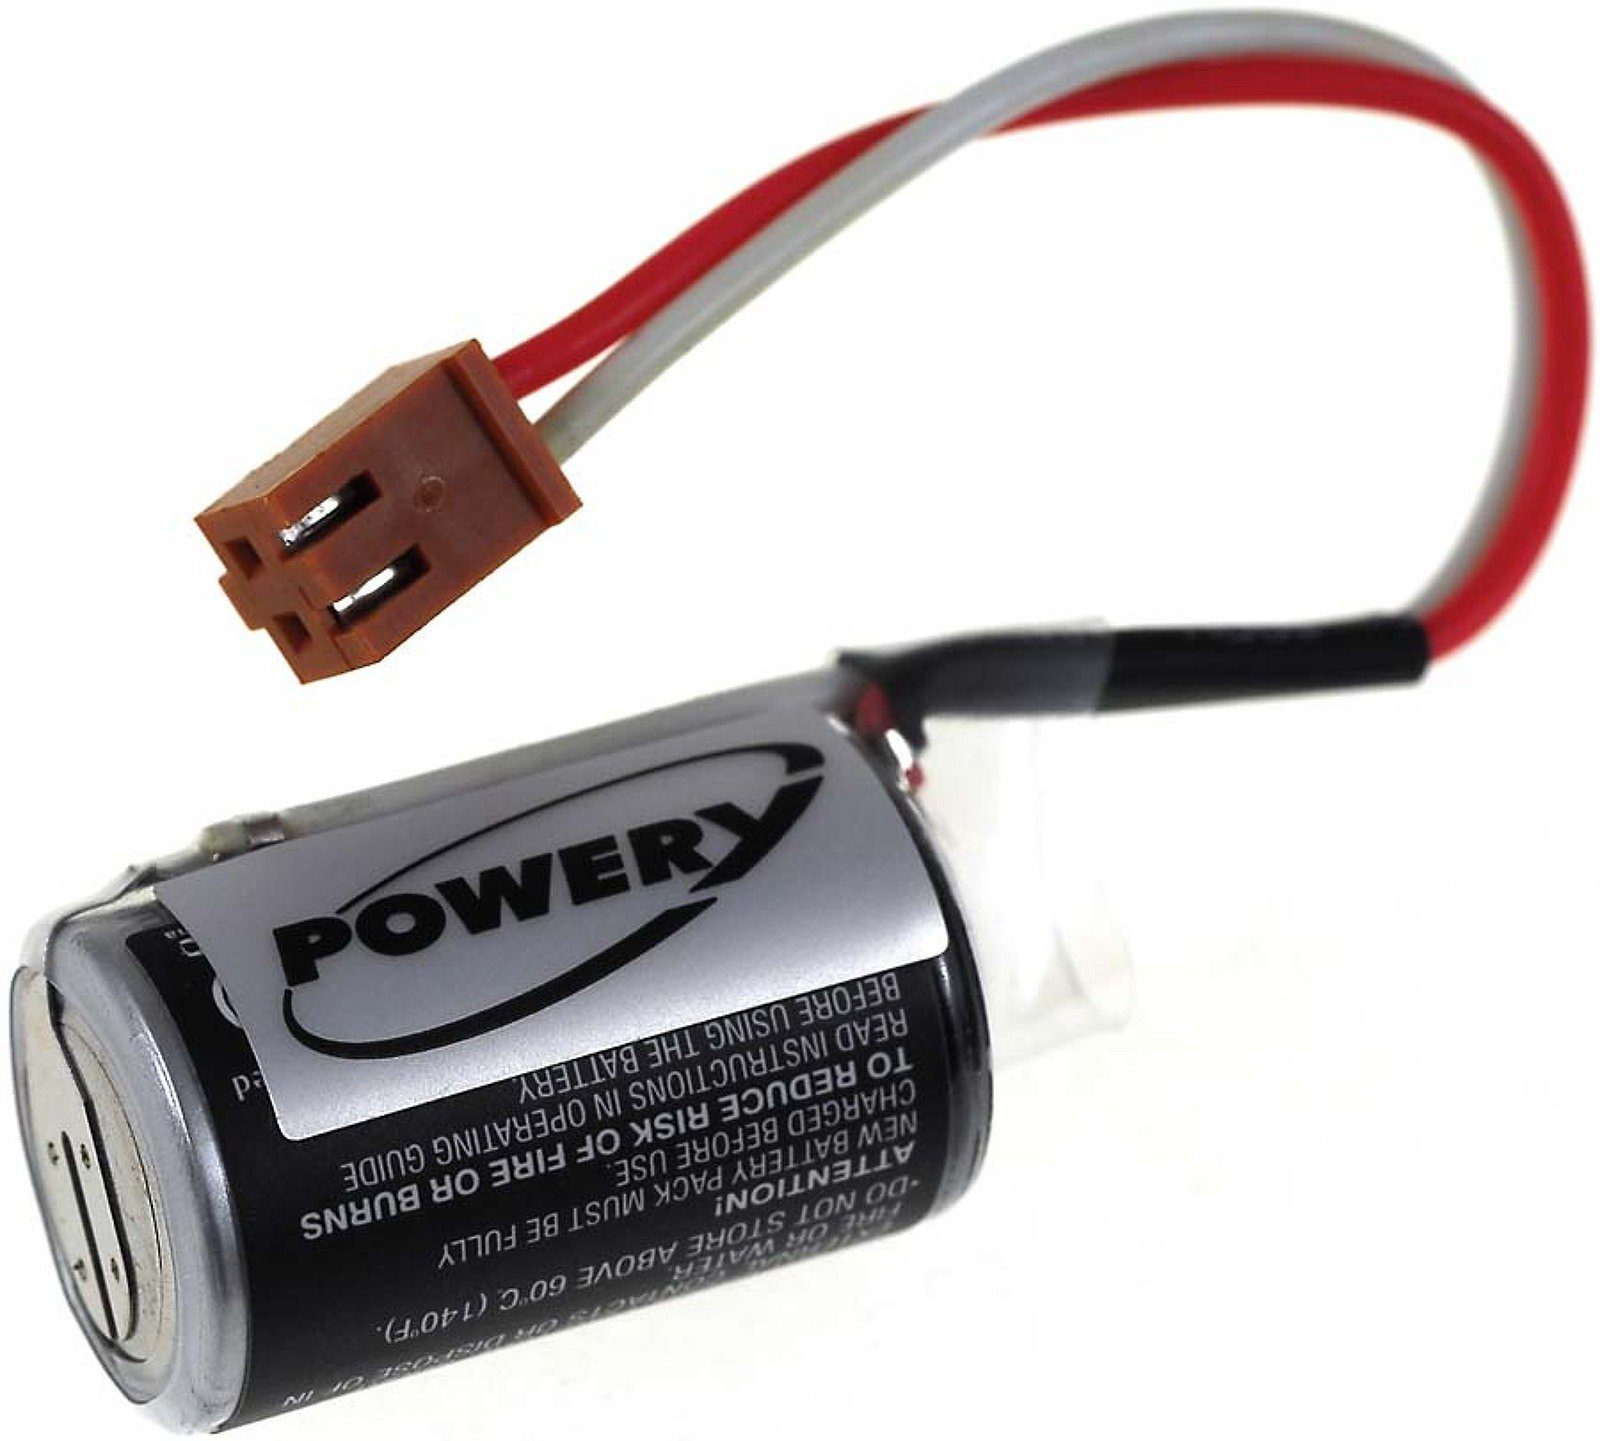 Powery SPS-Lithiumbatterie für Omron Batterie, CPM2A-BAT01 V) Typ (3.6